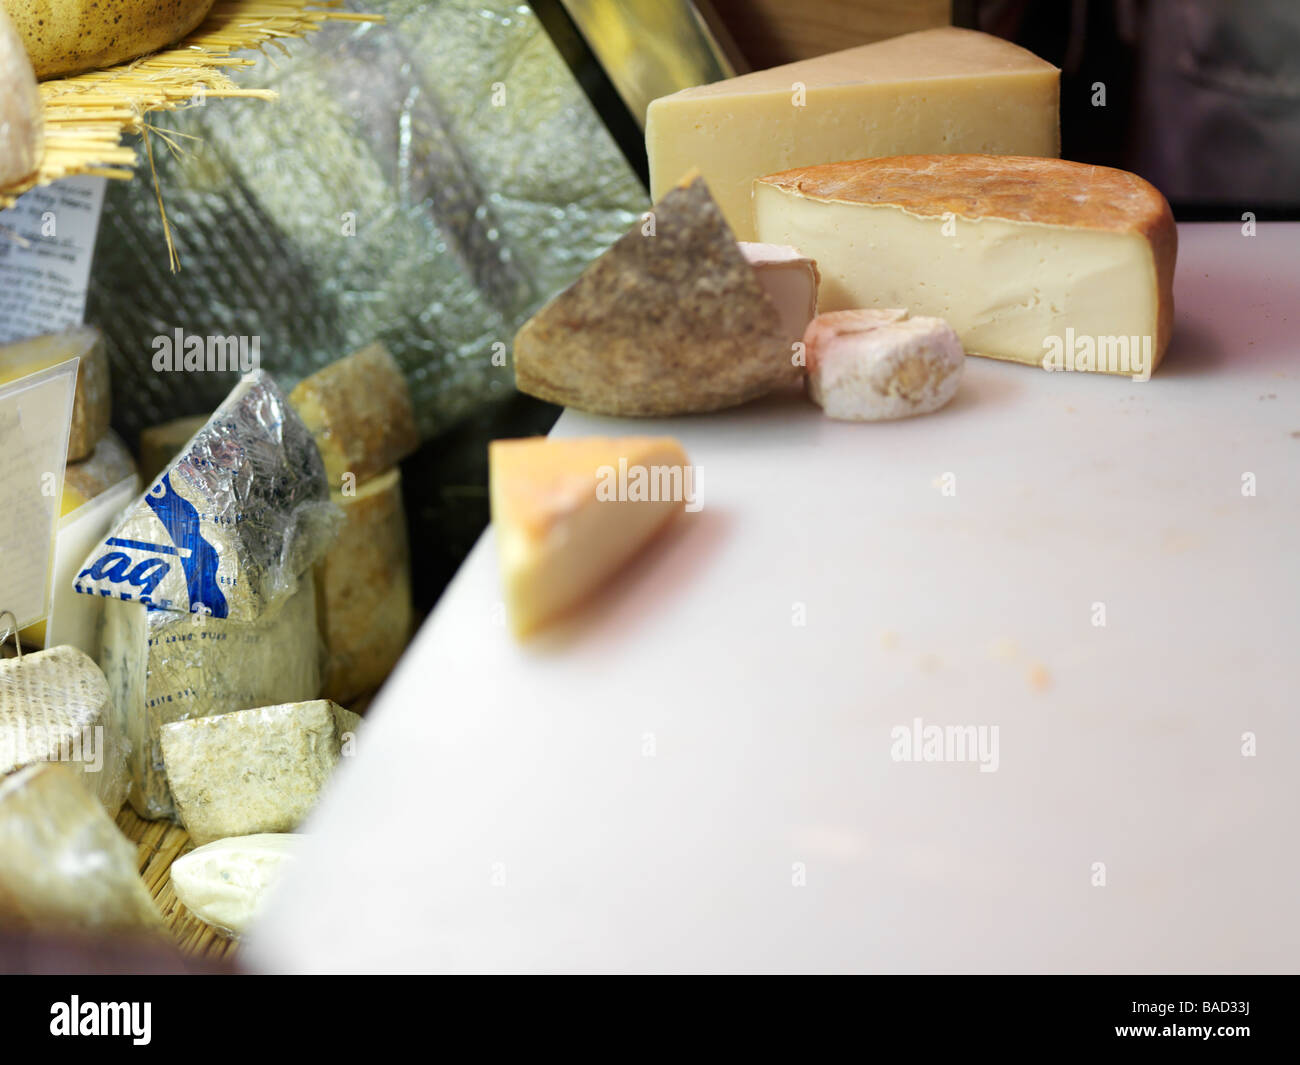 Saxelby Cheese Company in the Essex Street Market on the Lower East Side of Manhattan in New York City. Stock Photo